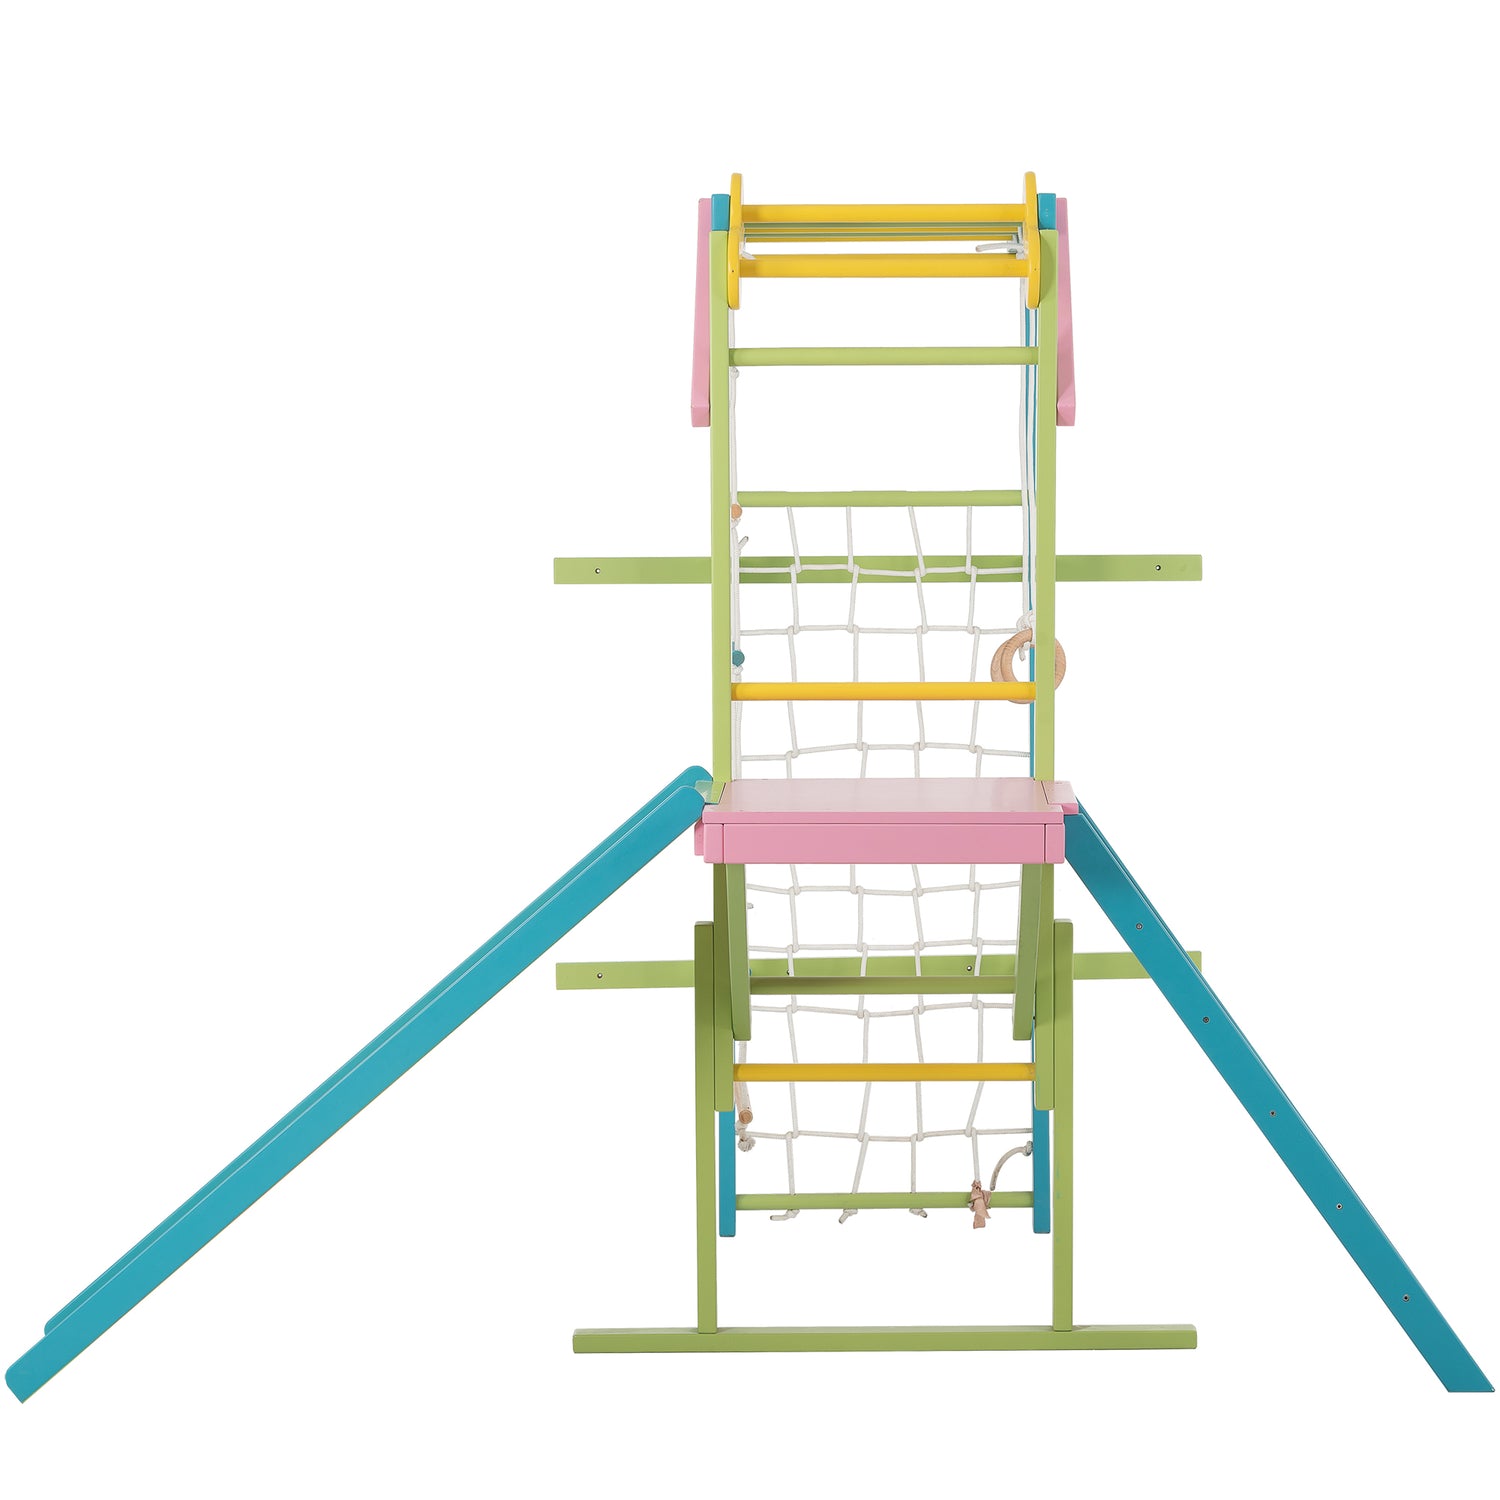 The Grove Jungle Gym - Avenlur's Premium 8 in 1 Wooden Playset for Older Kids - Colorful Edition - Side View